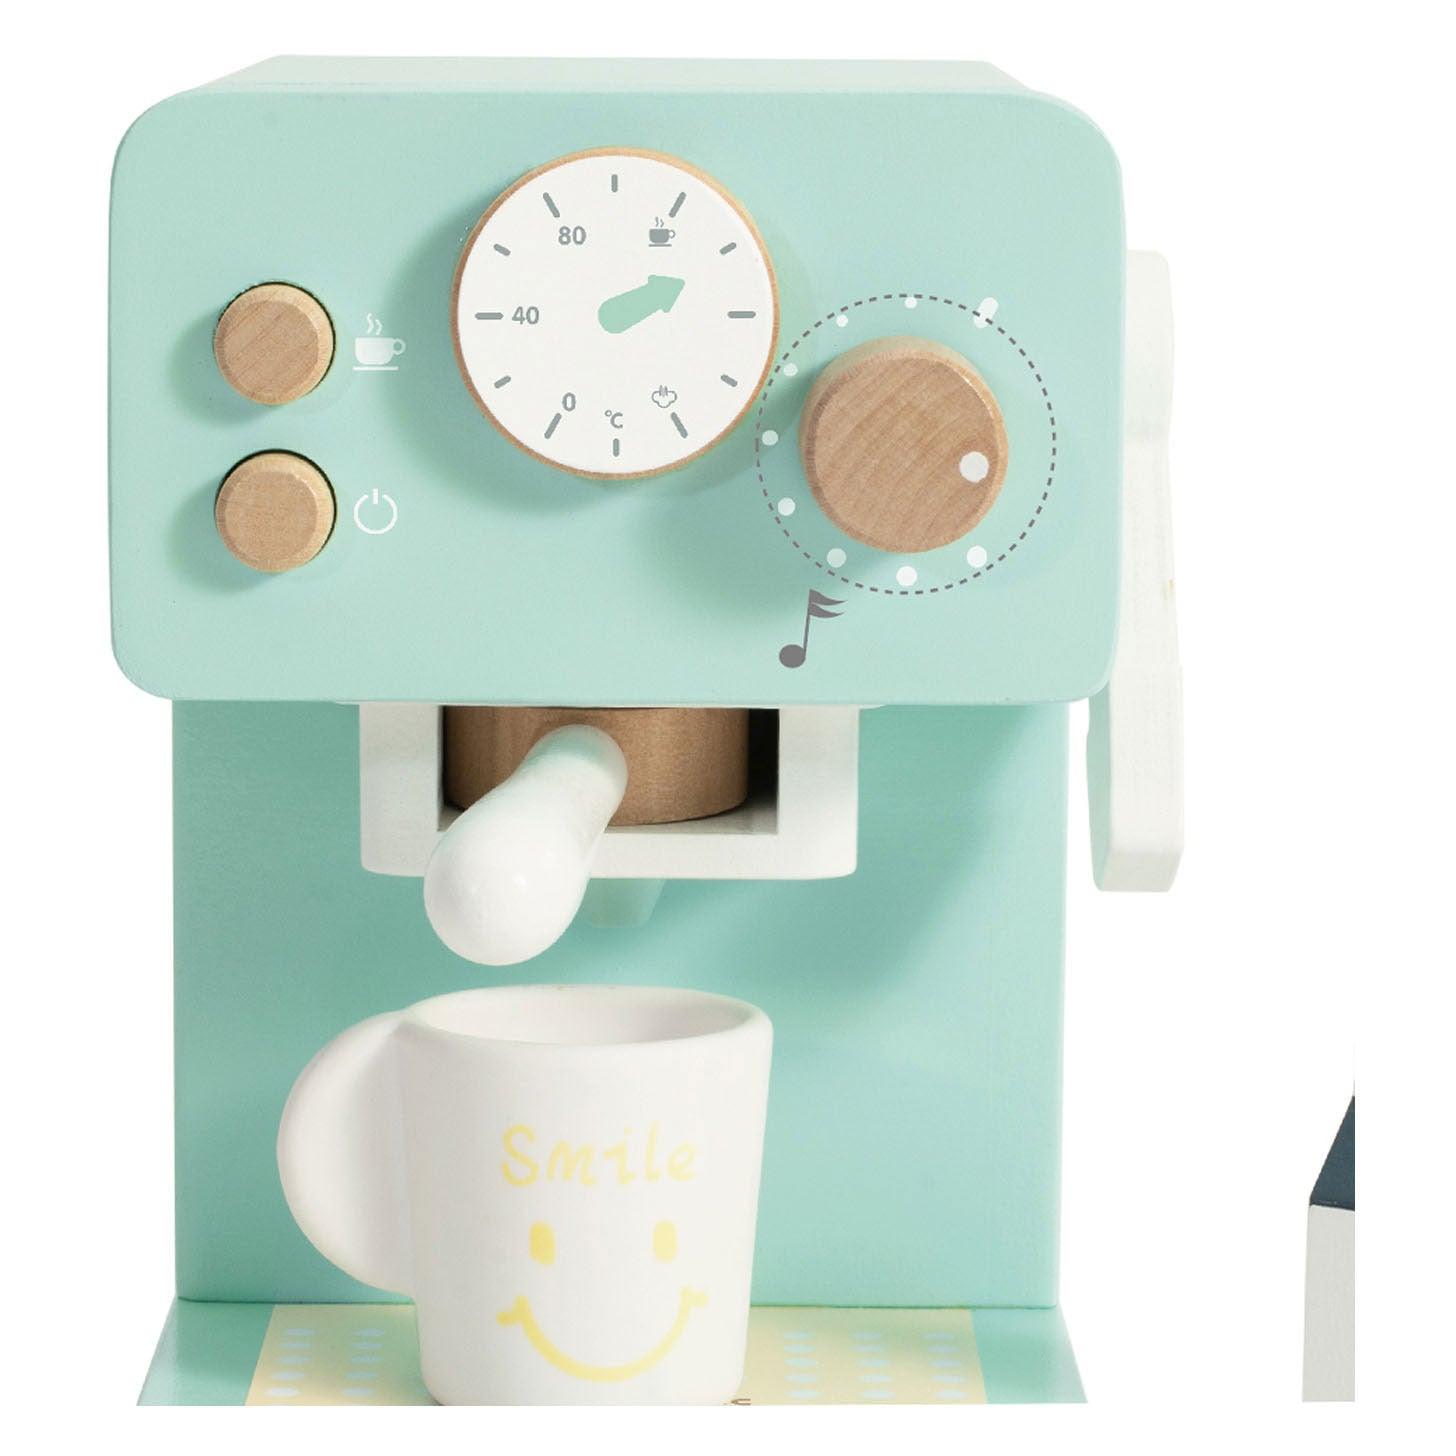 Children's Wooden Toy - A coffee maker - MoonyBoon